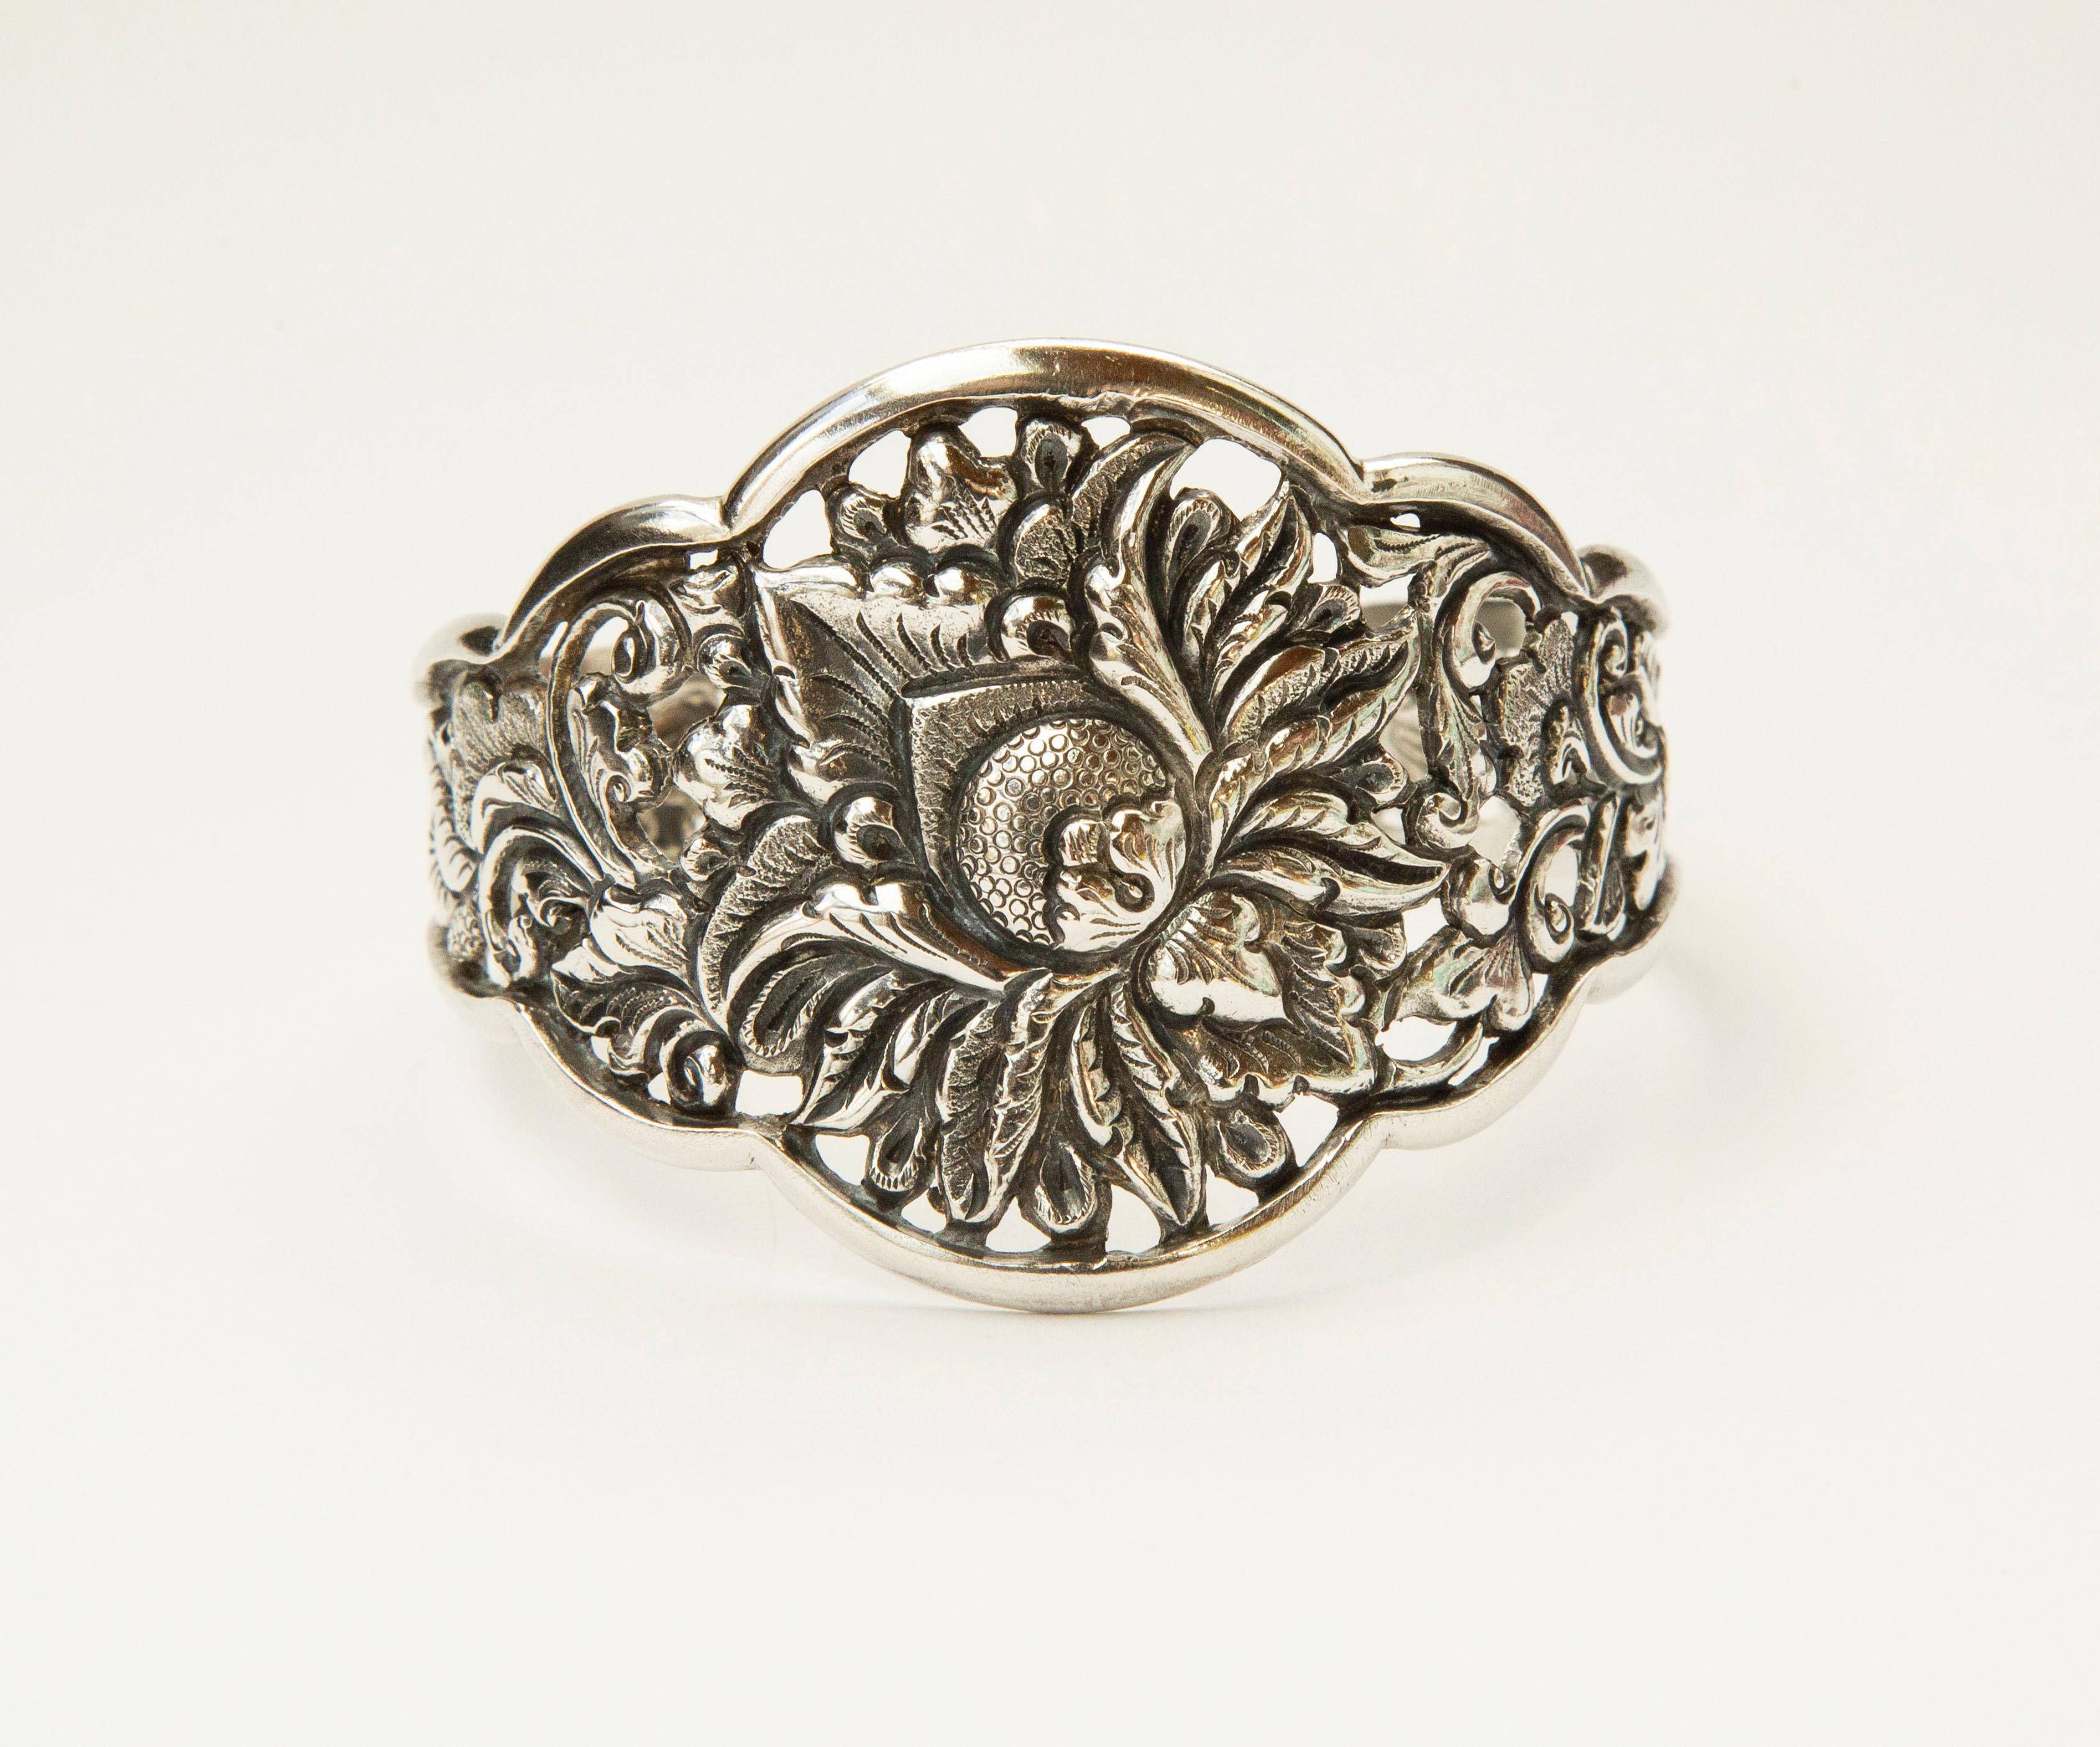 Art Deco Vintage Indonesian Silver 800 Cuff Bracelet with Floral Decor CA. 1930s For Sale